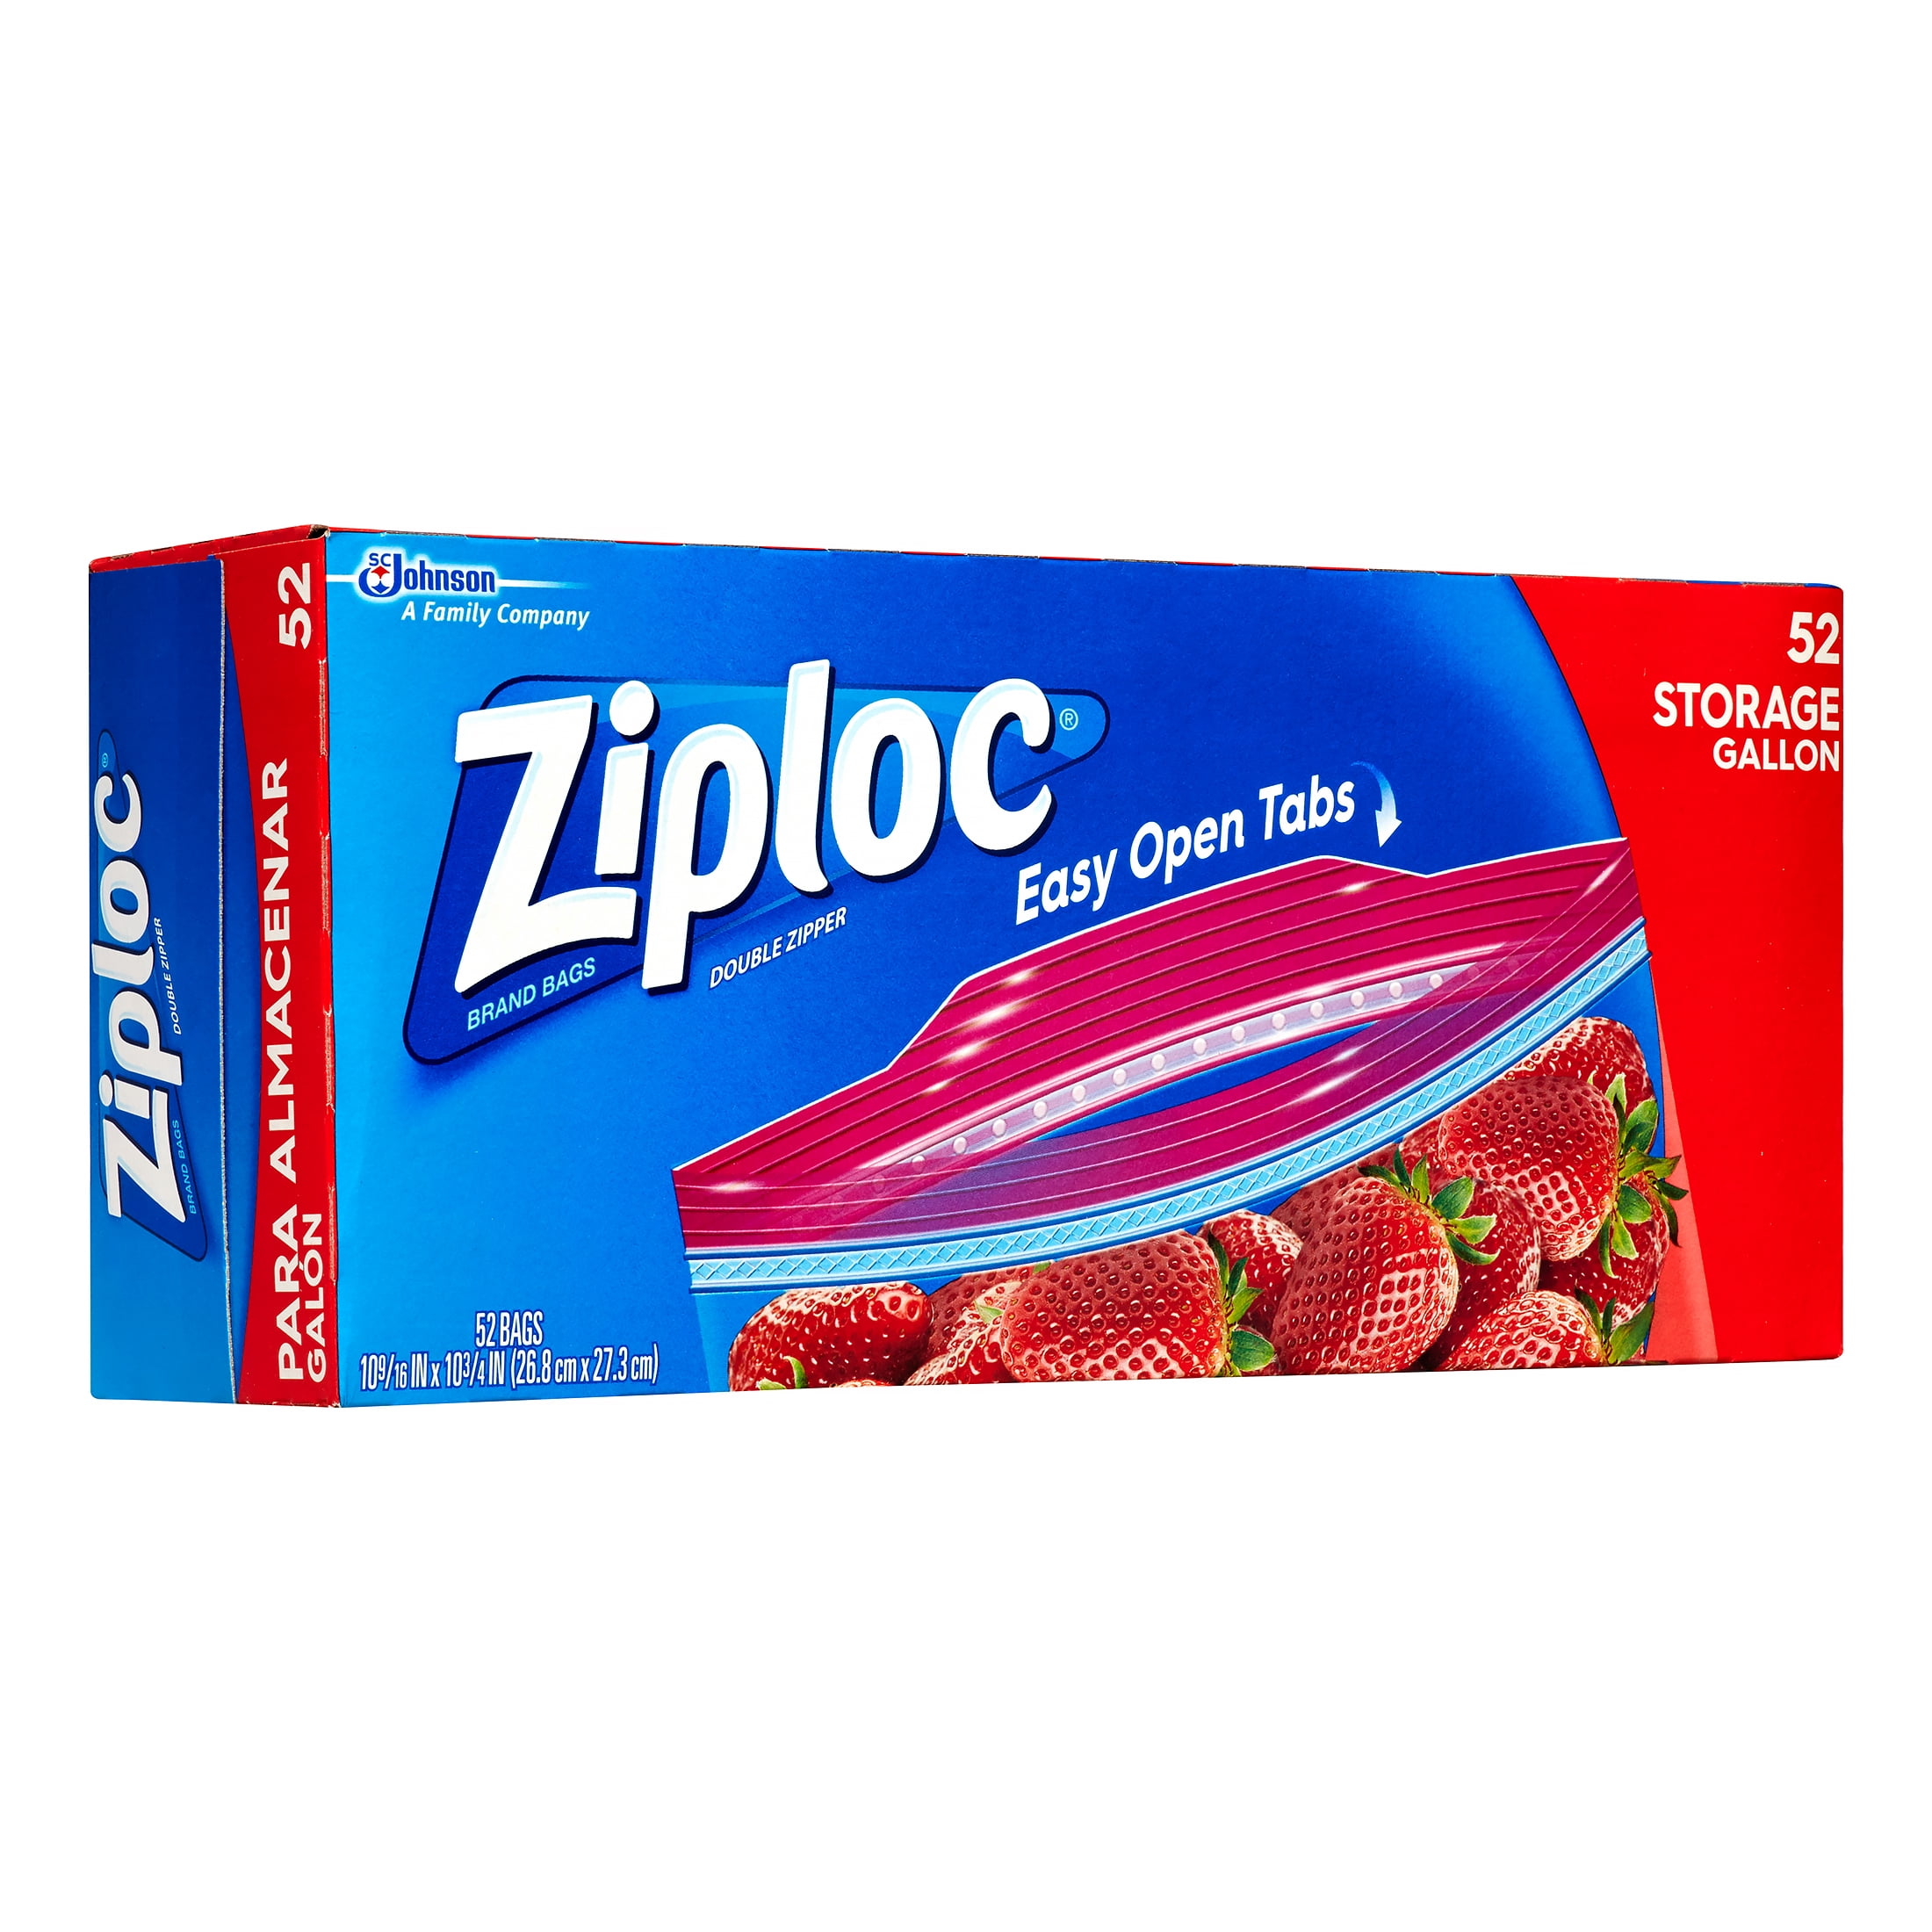 Ziploc double zipper gallon storage bags - The Electric Brewery